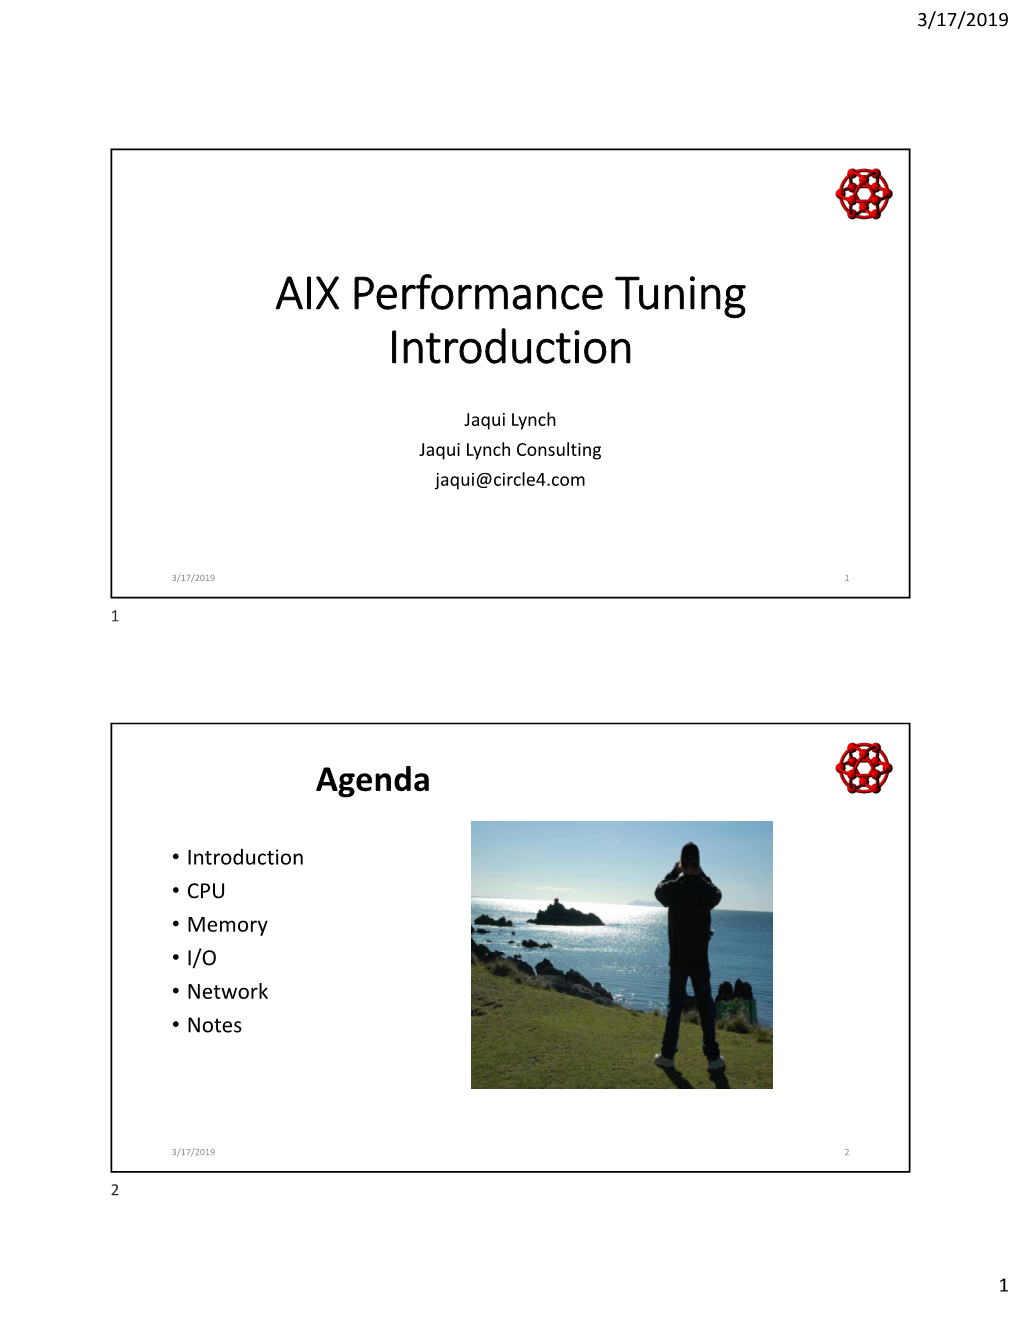 AIX Performance Tuning Introduction